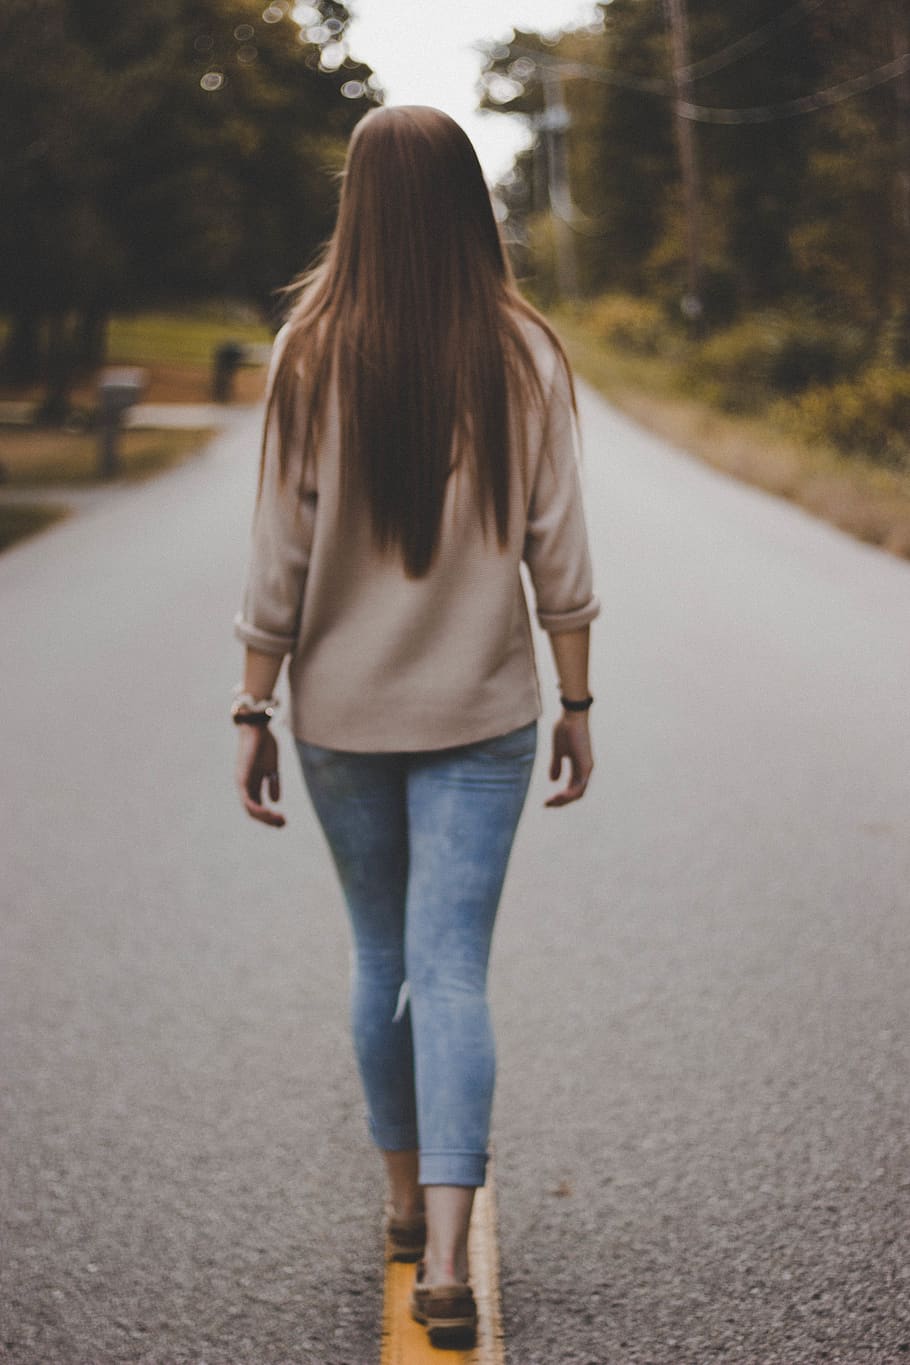 woman in grey shirt and blue denim pants walking on road during daytime, HD wallpaper